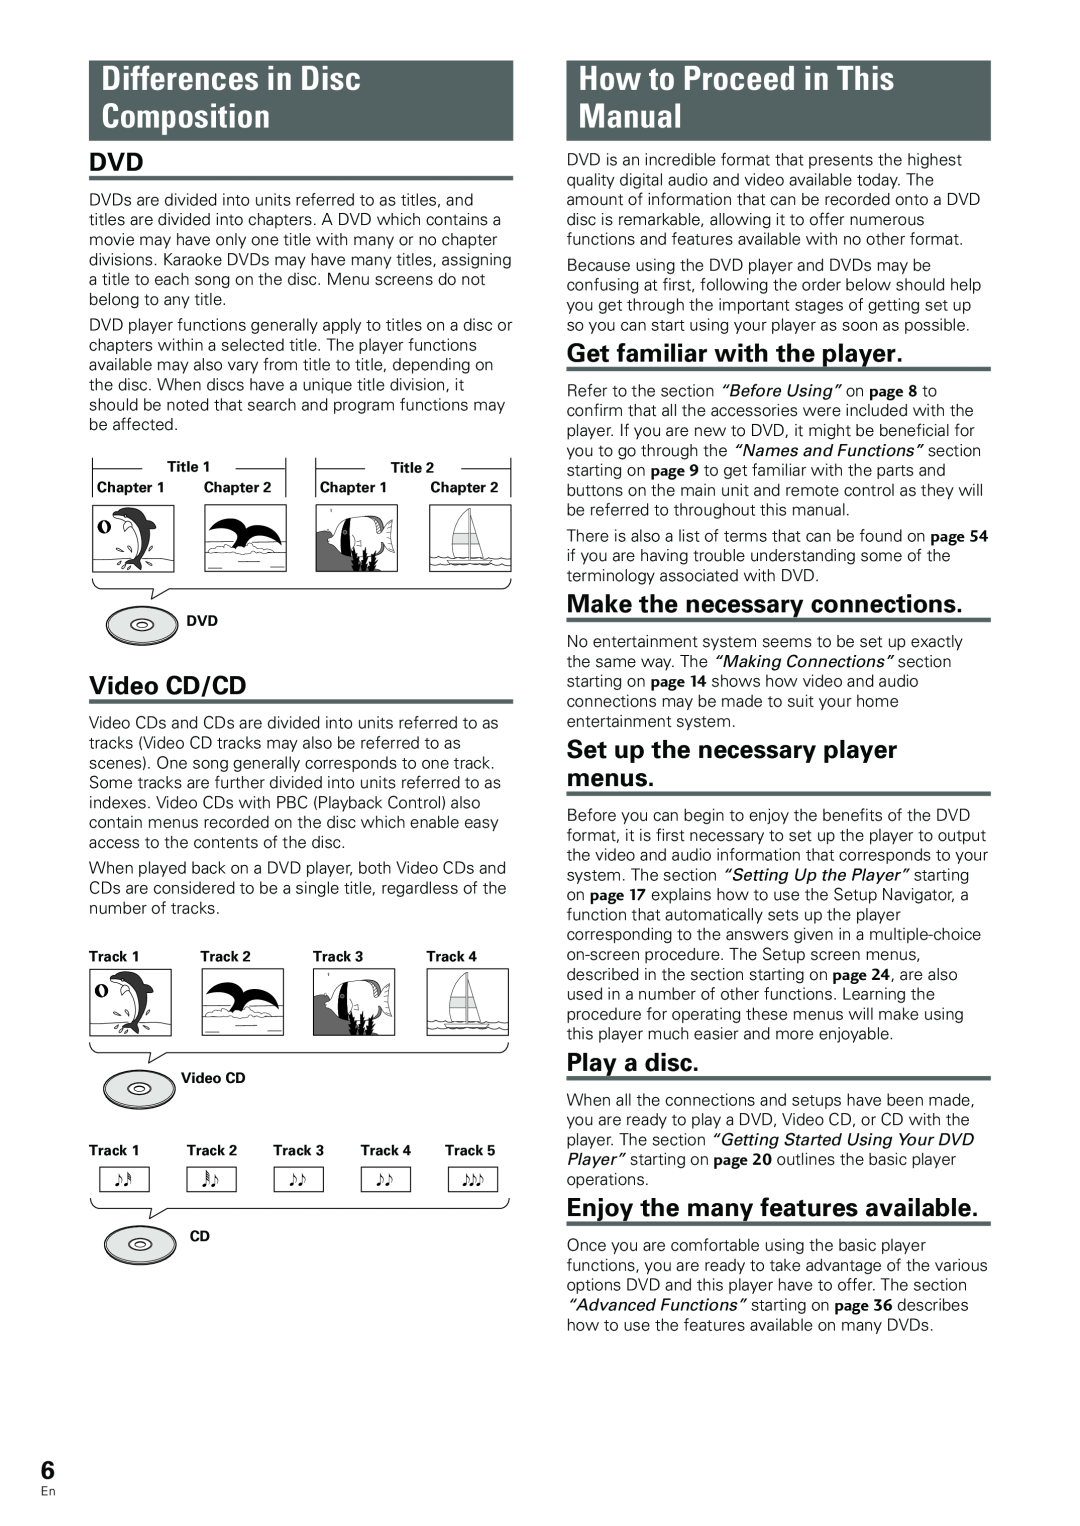 Pioneer DV-233 Differences in Disc Composition, How to Proceed in This Manual, Video CD/CD, Get familiar with the player 